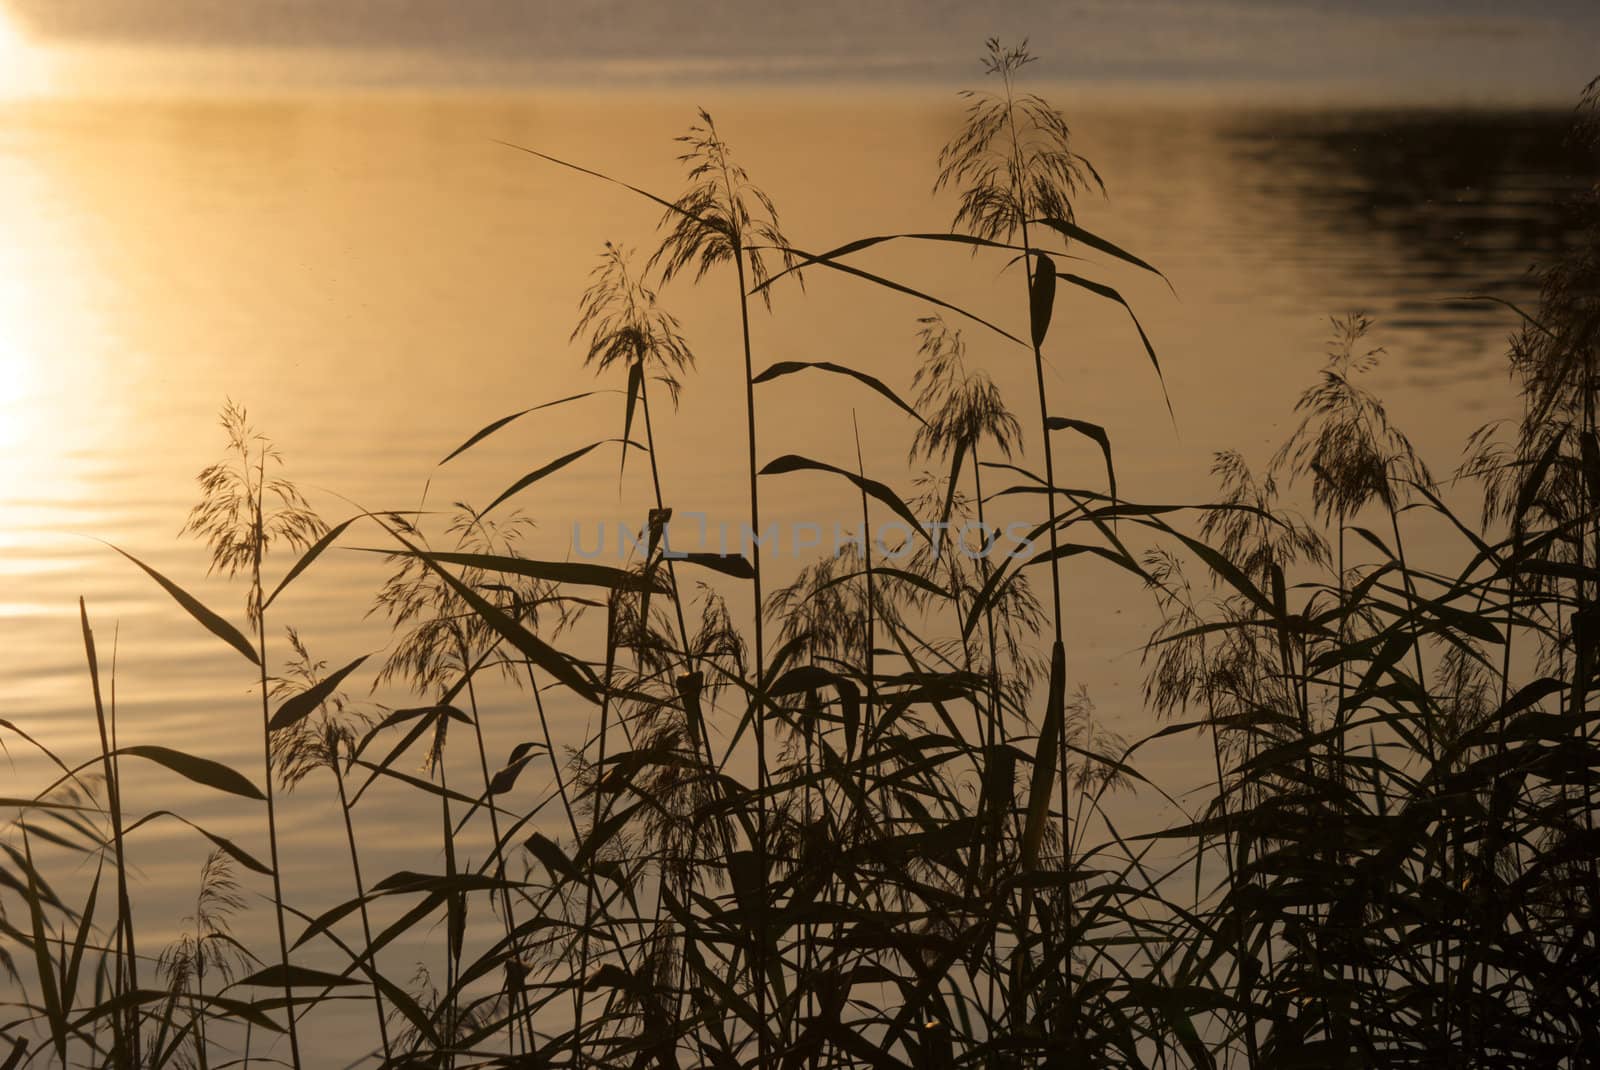 The reeds on a lakesaid.